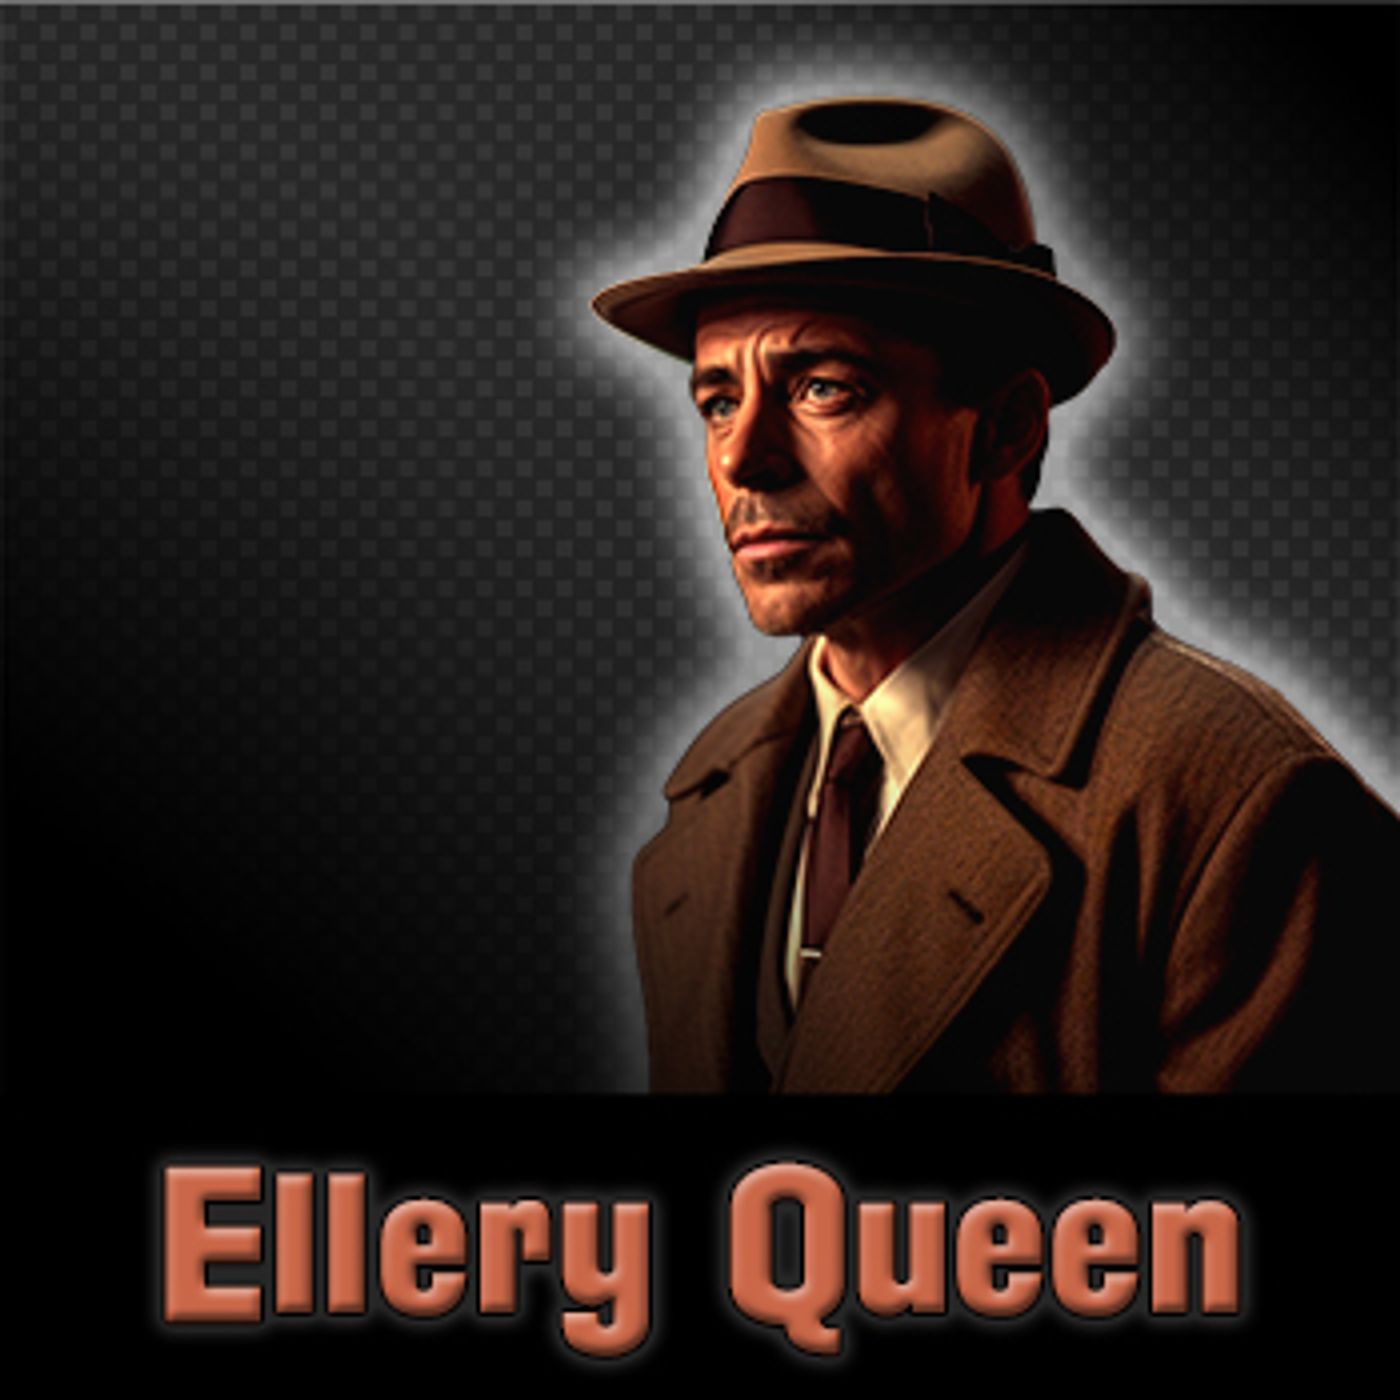 Ellery Queen: The Adventure of the Wounded Lieutenant (EP4360)